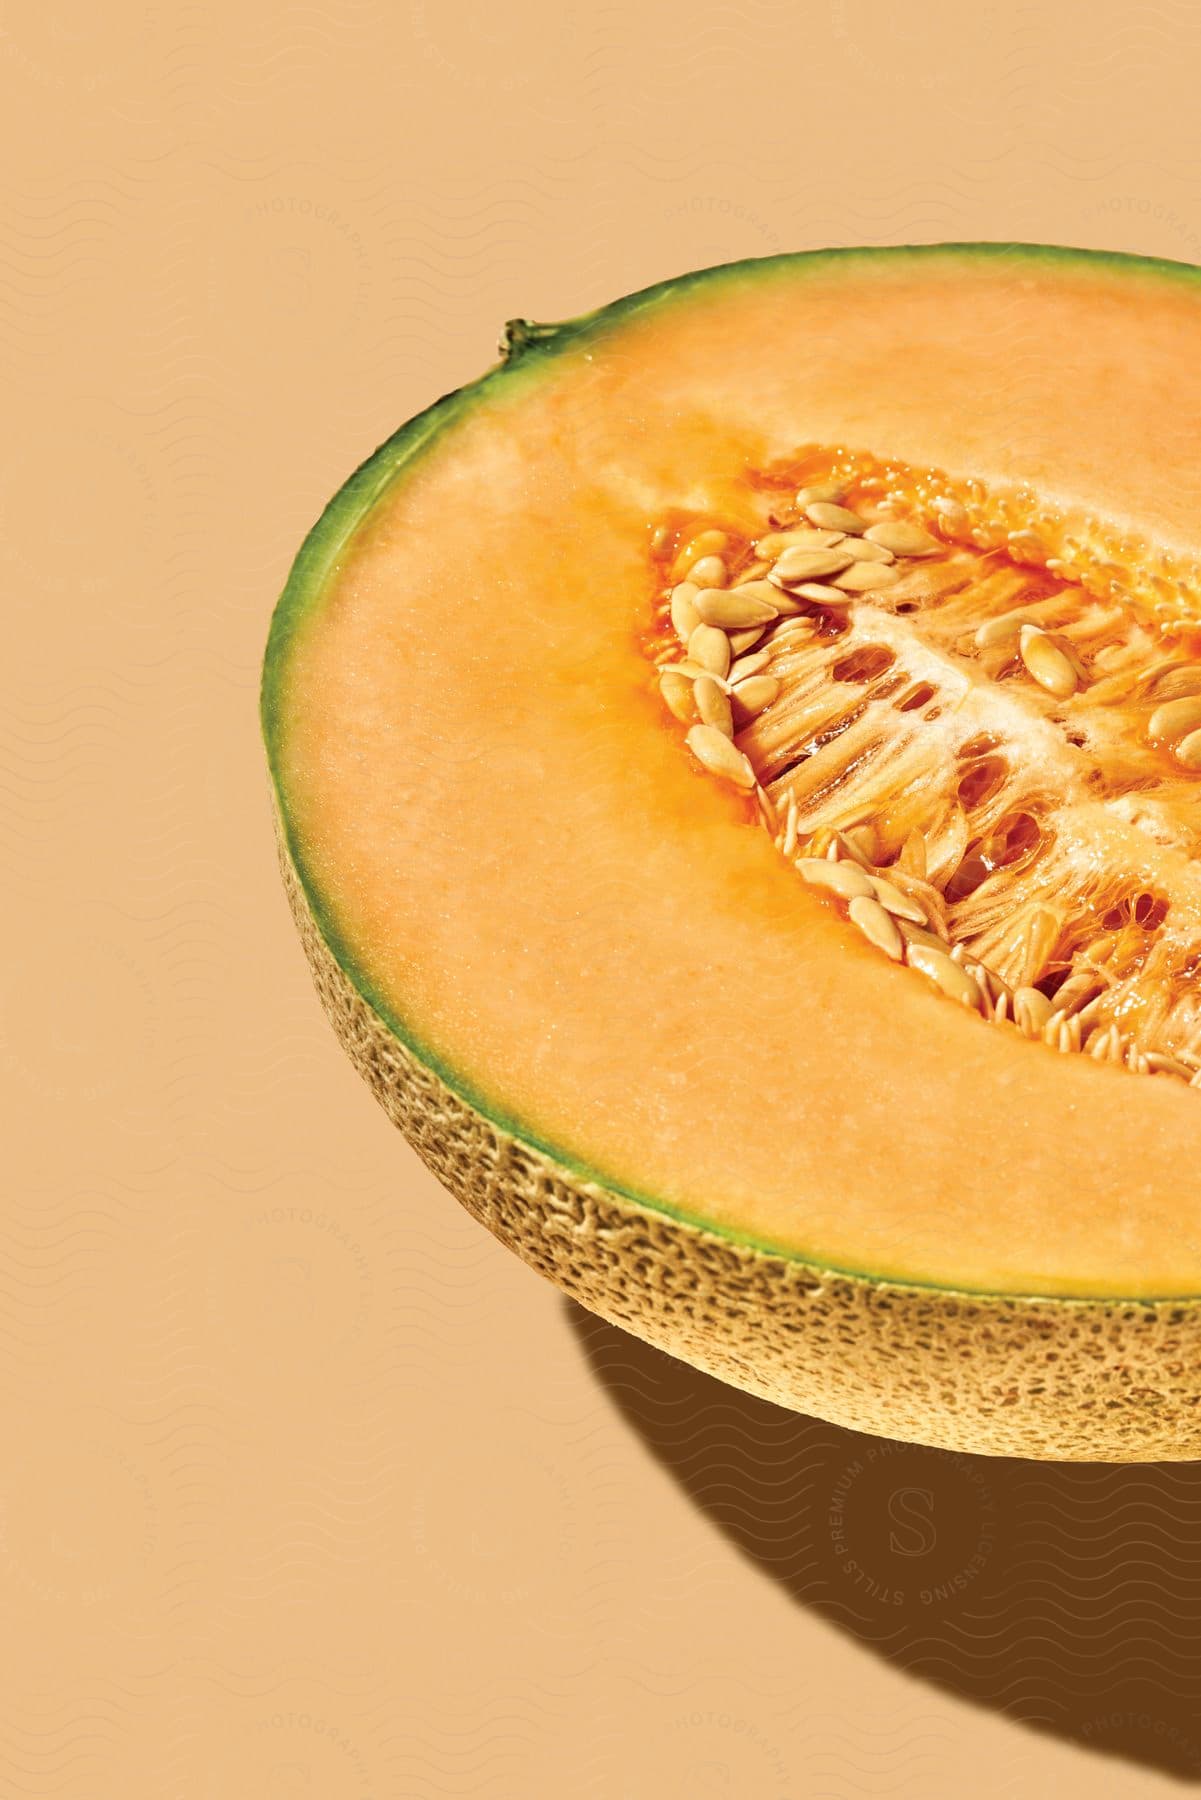 Close up of melon seeds inside a halved melon placed on a cream background